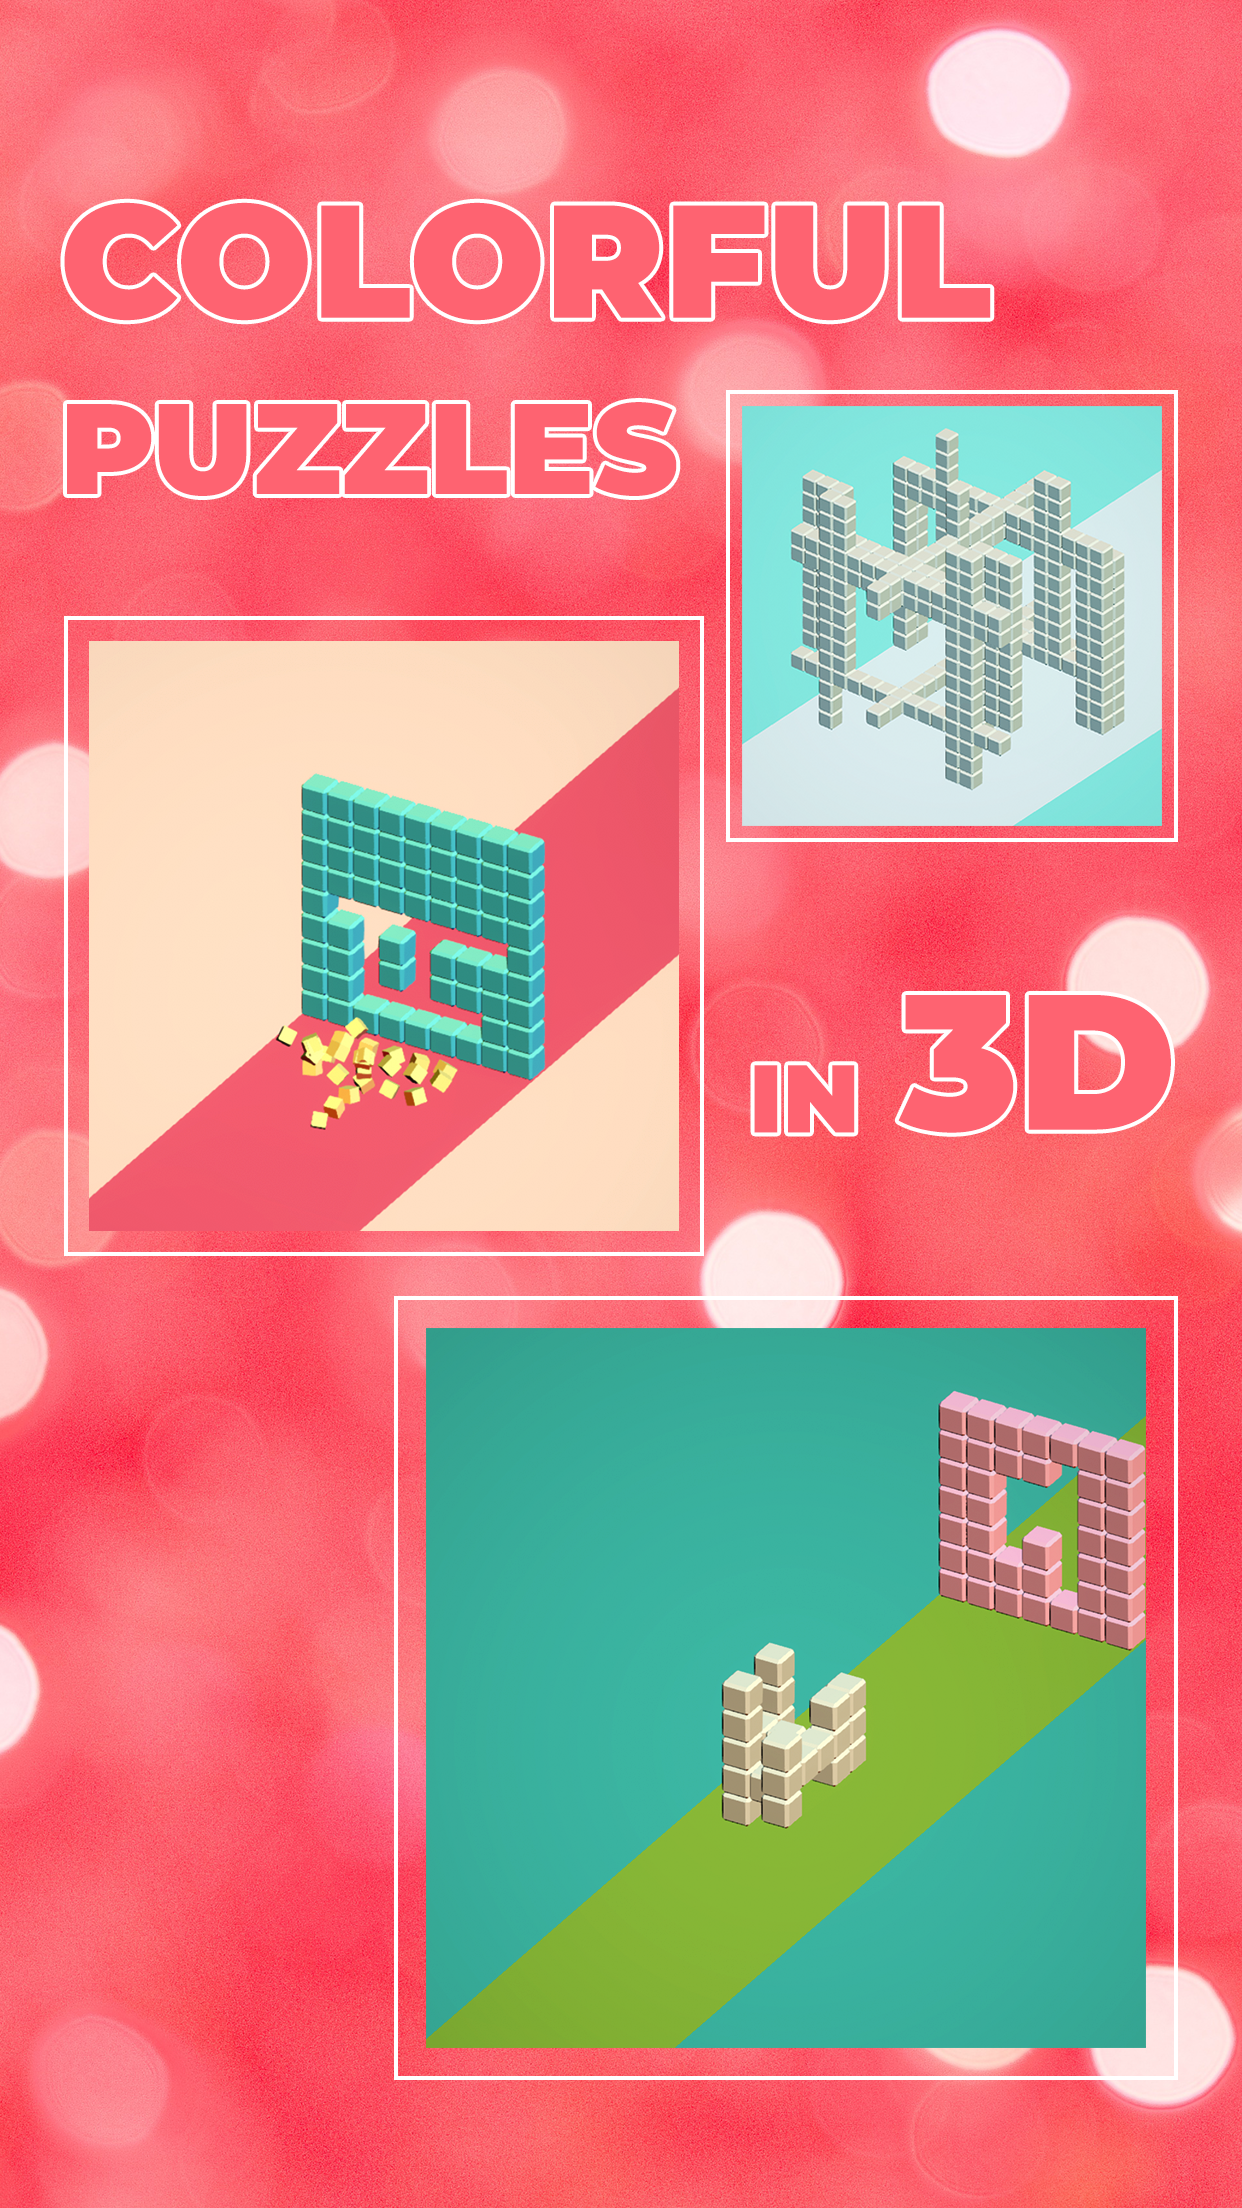 Colorful Puzzles in 3D